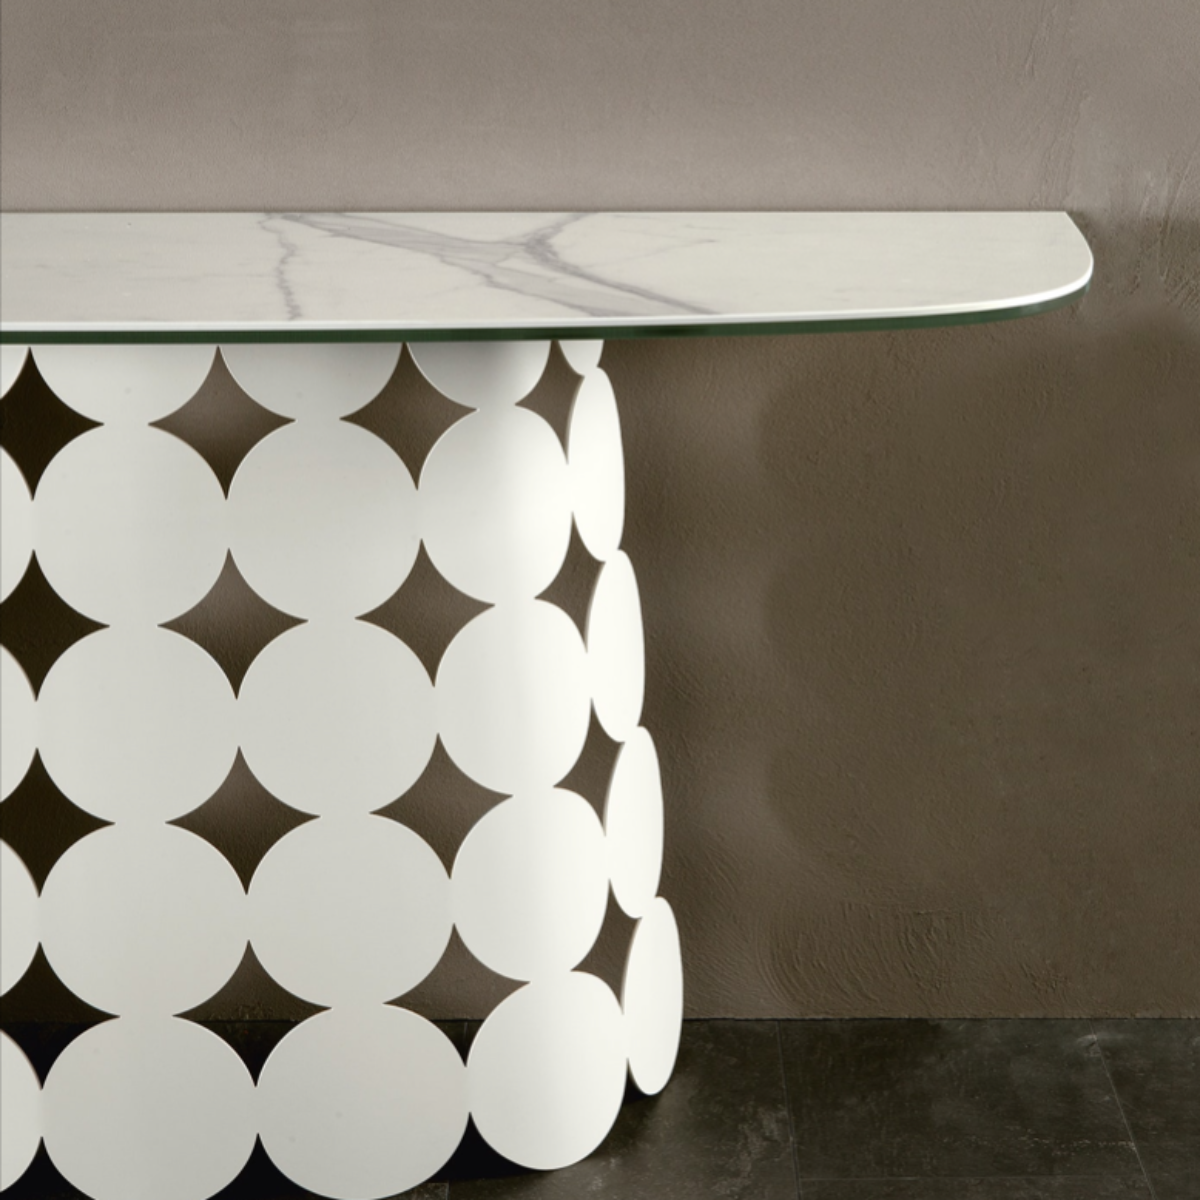 Pois Console Table by Tonin Casa